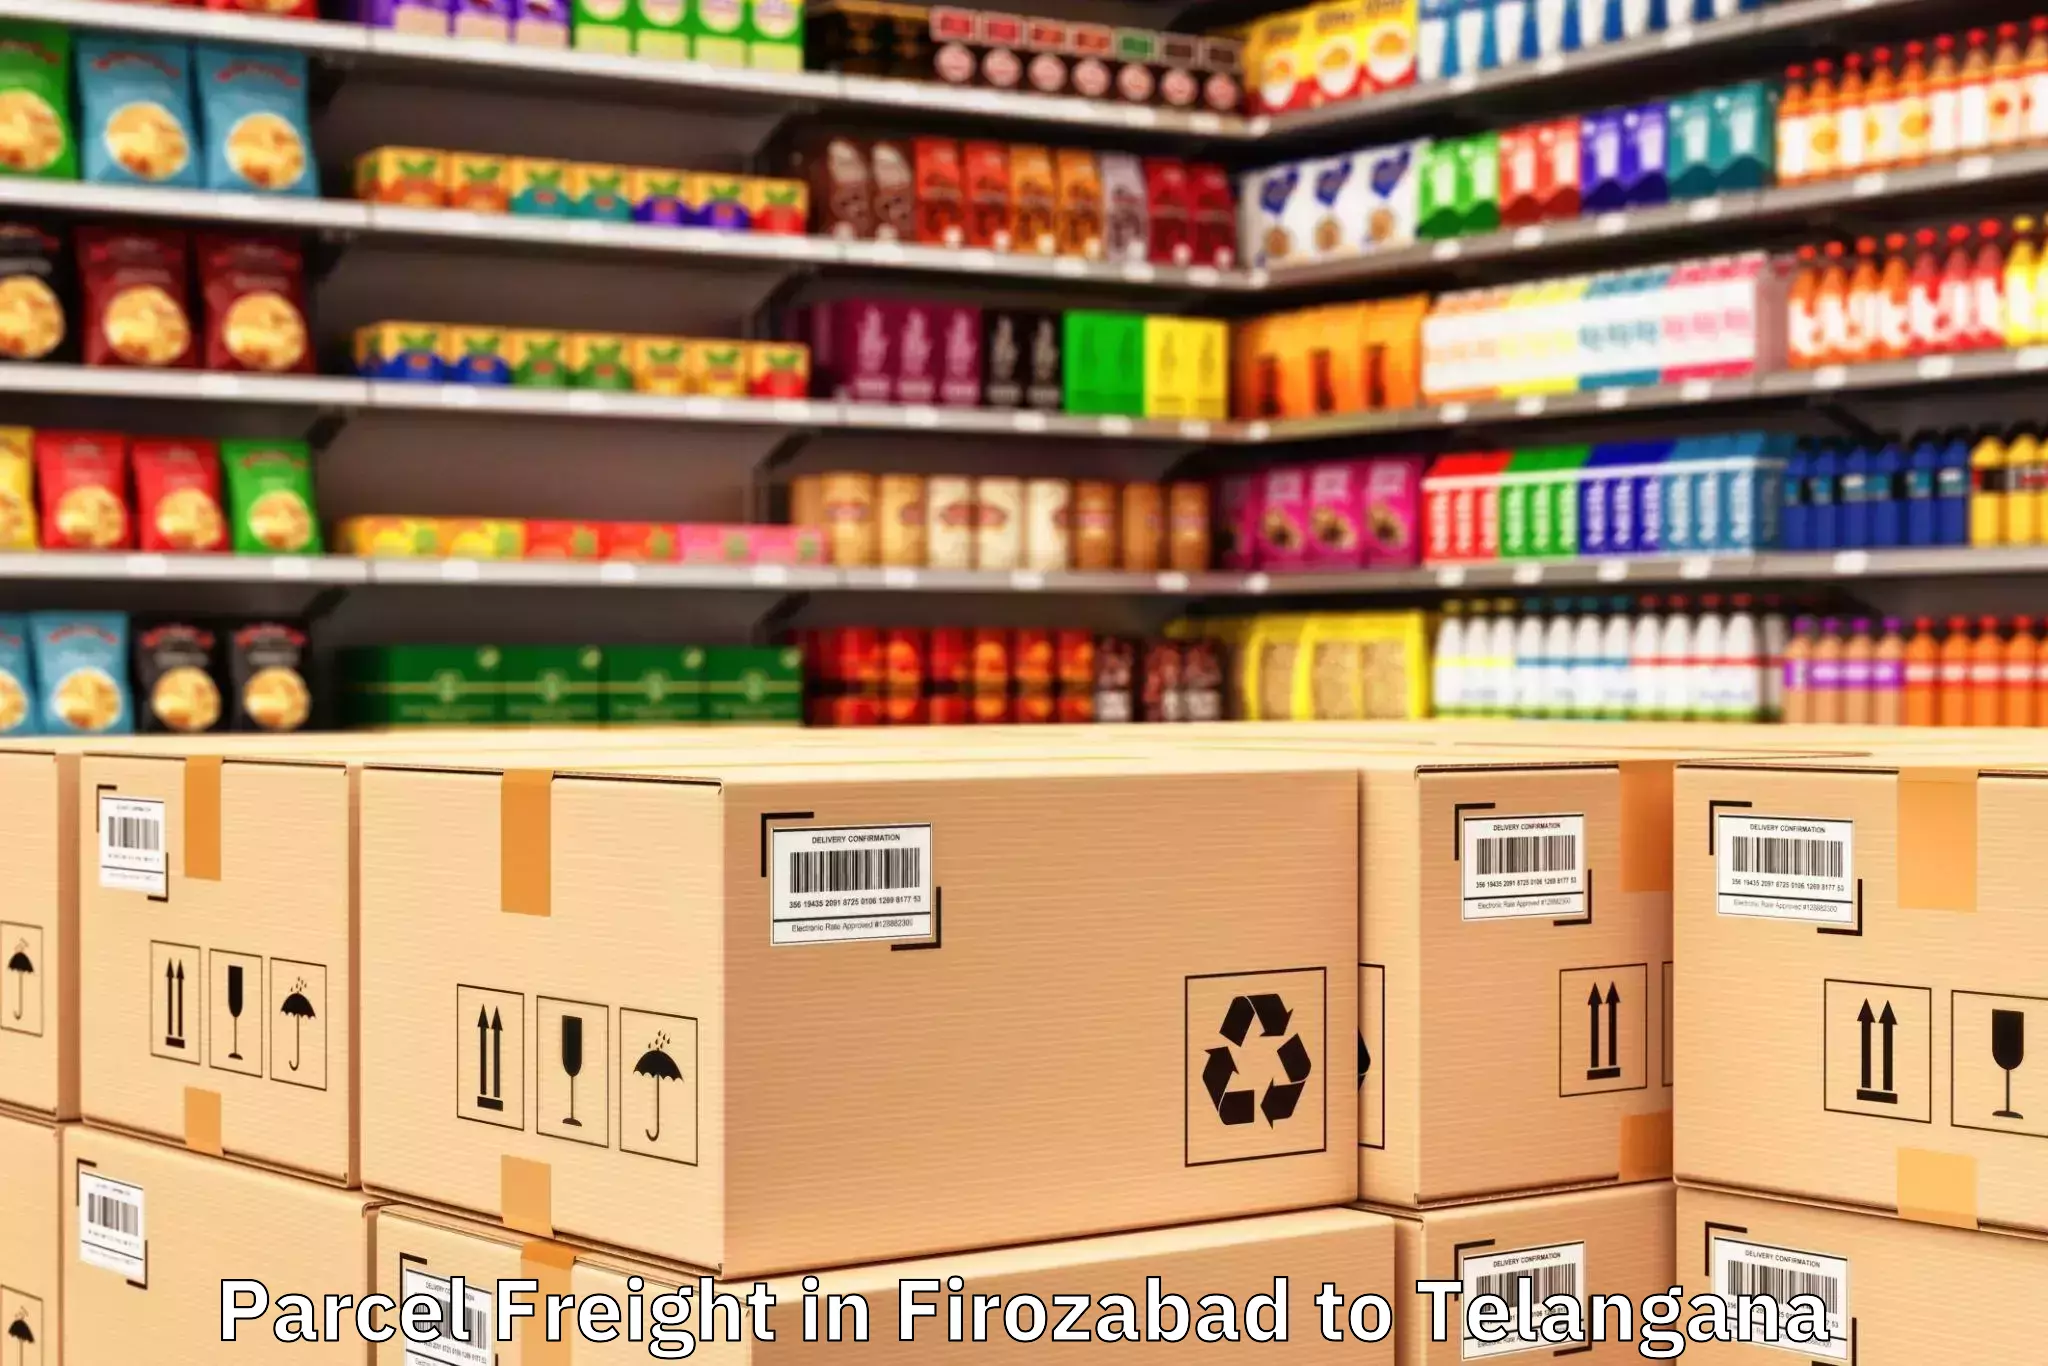 Reliable Firozabad to Osmania University Hyderabad Parcel Freight